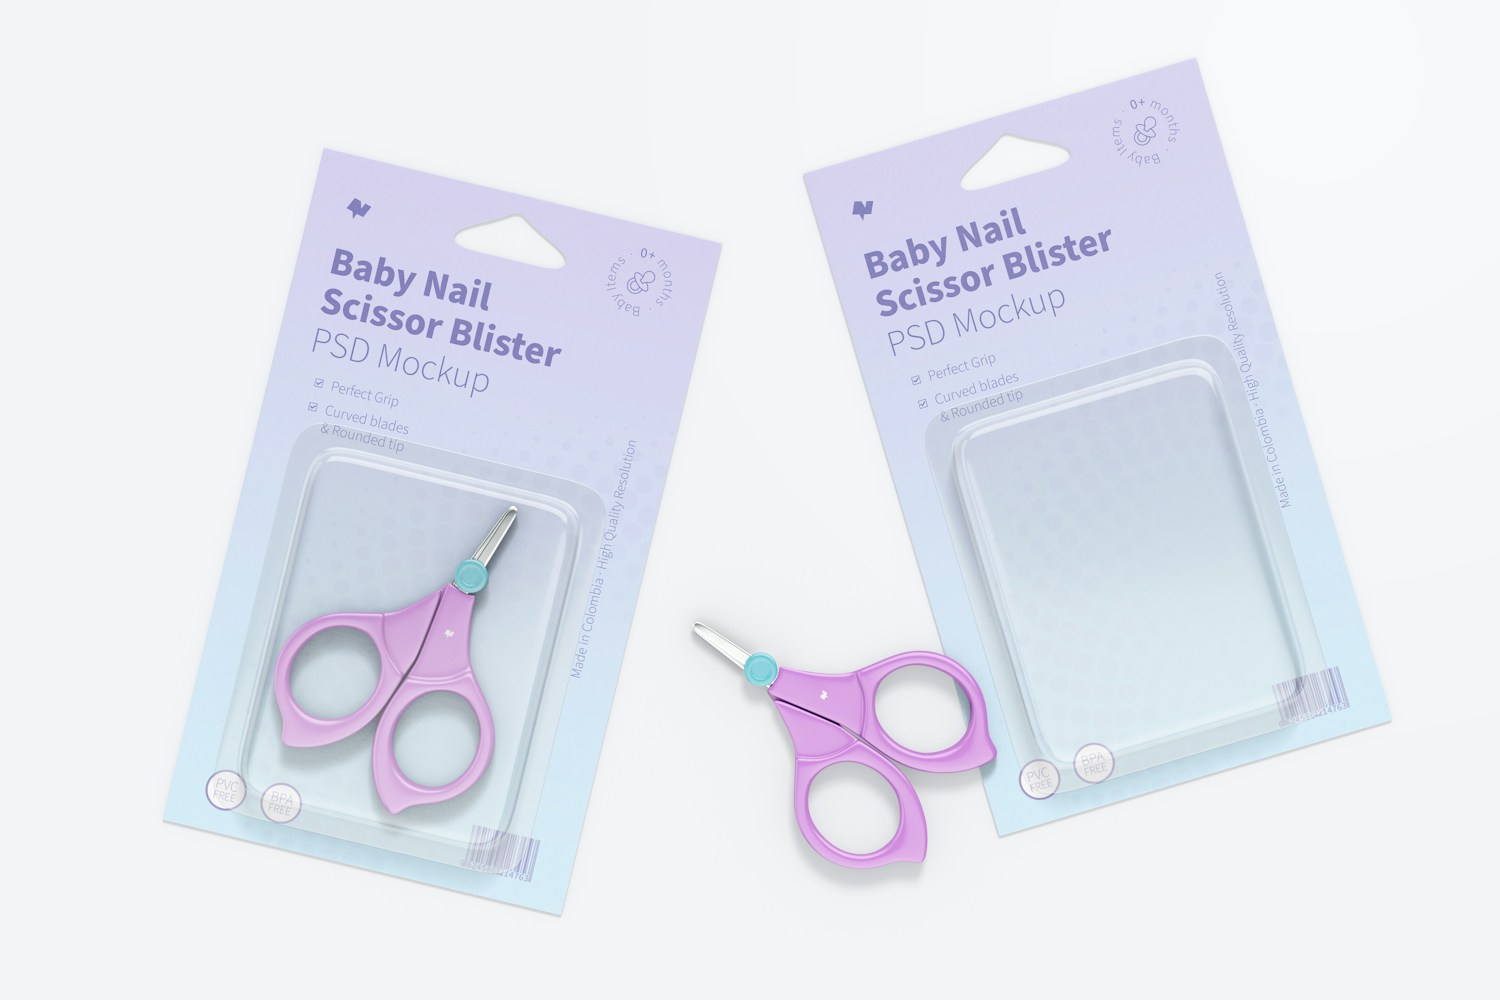 Baby Nail Scissor Blister Mockup, Top View